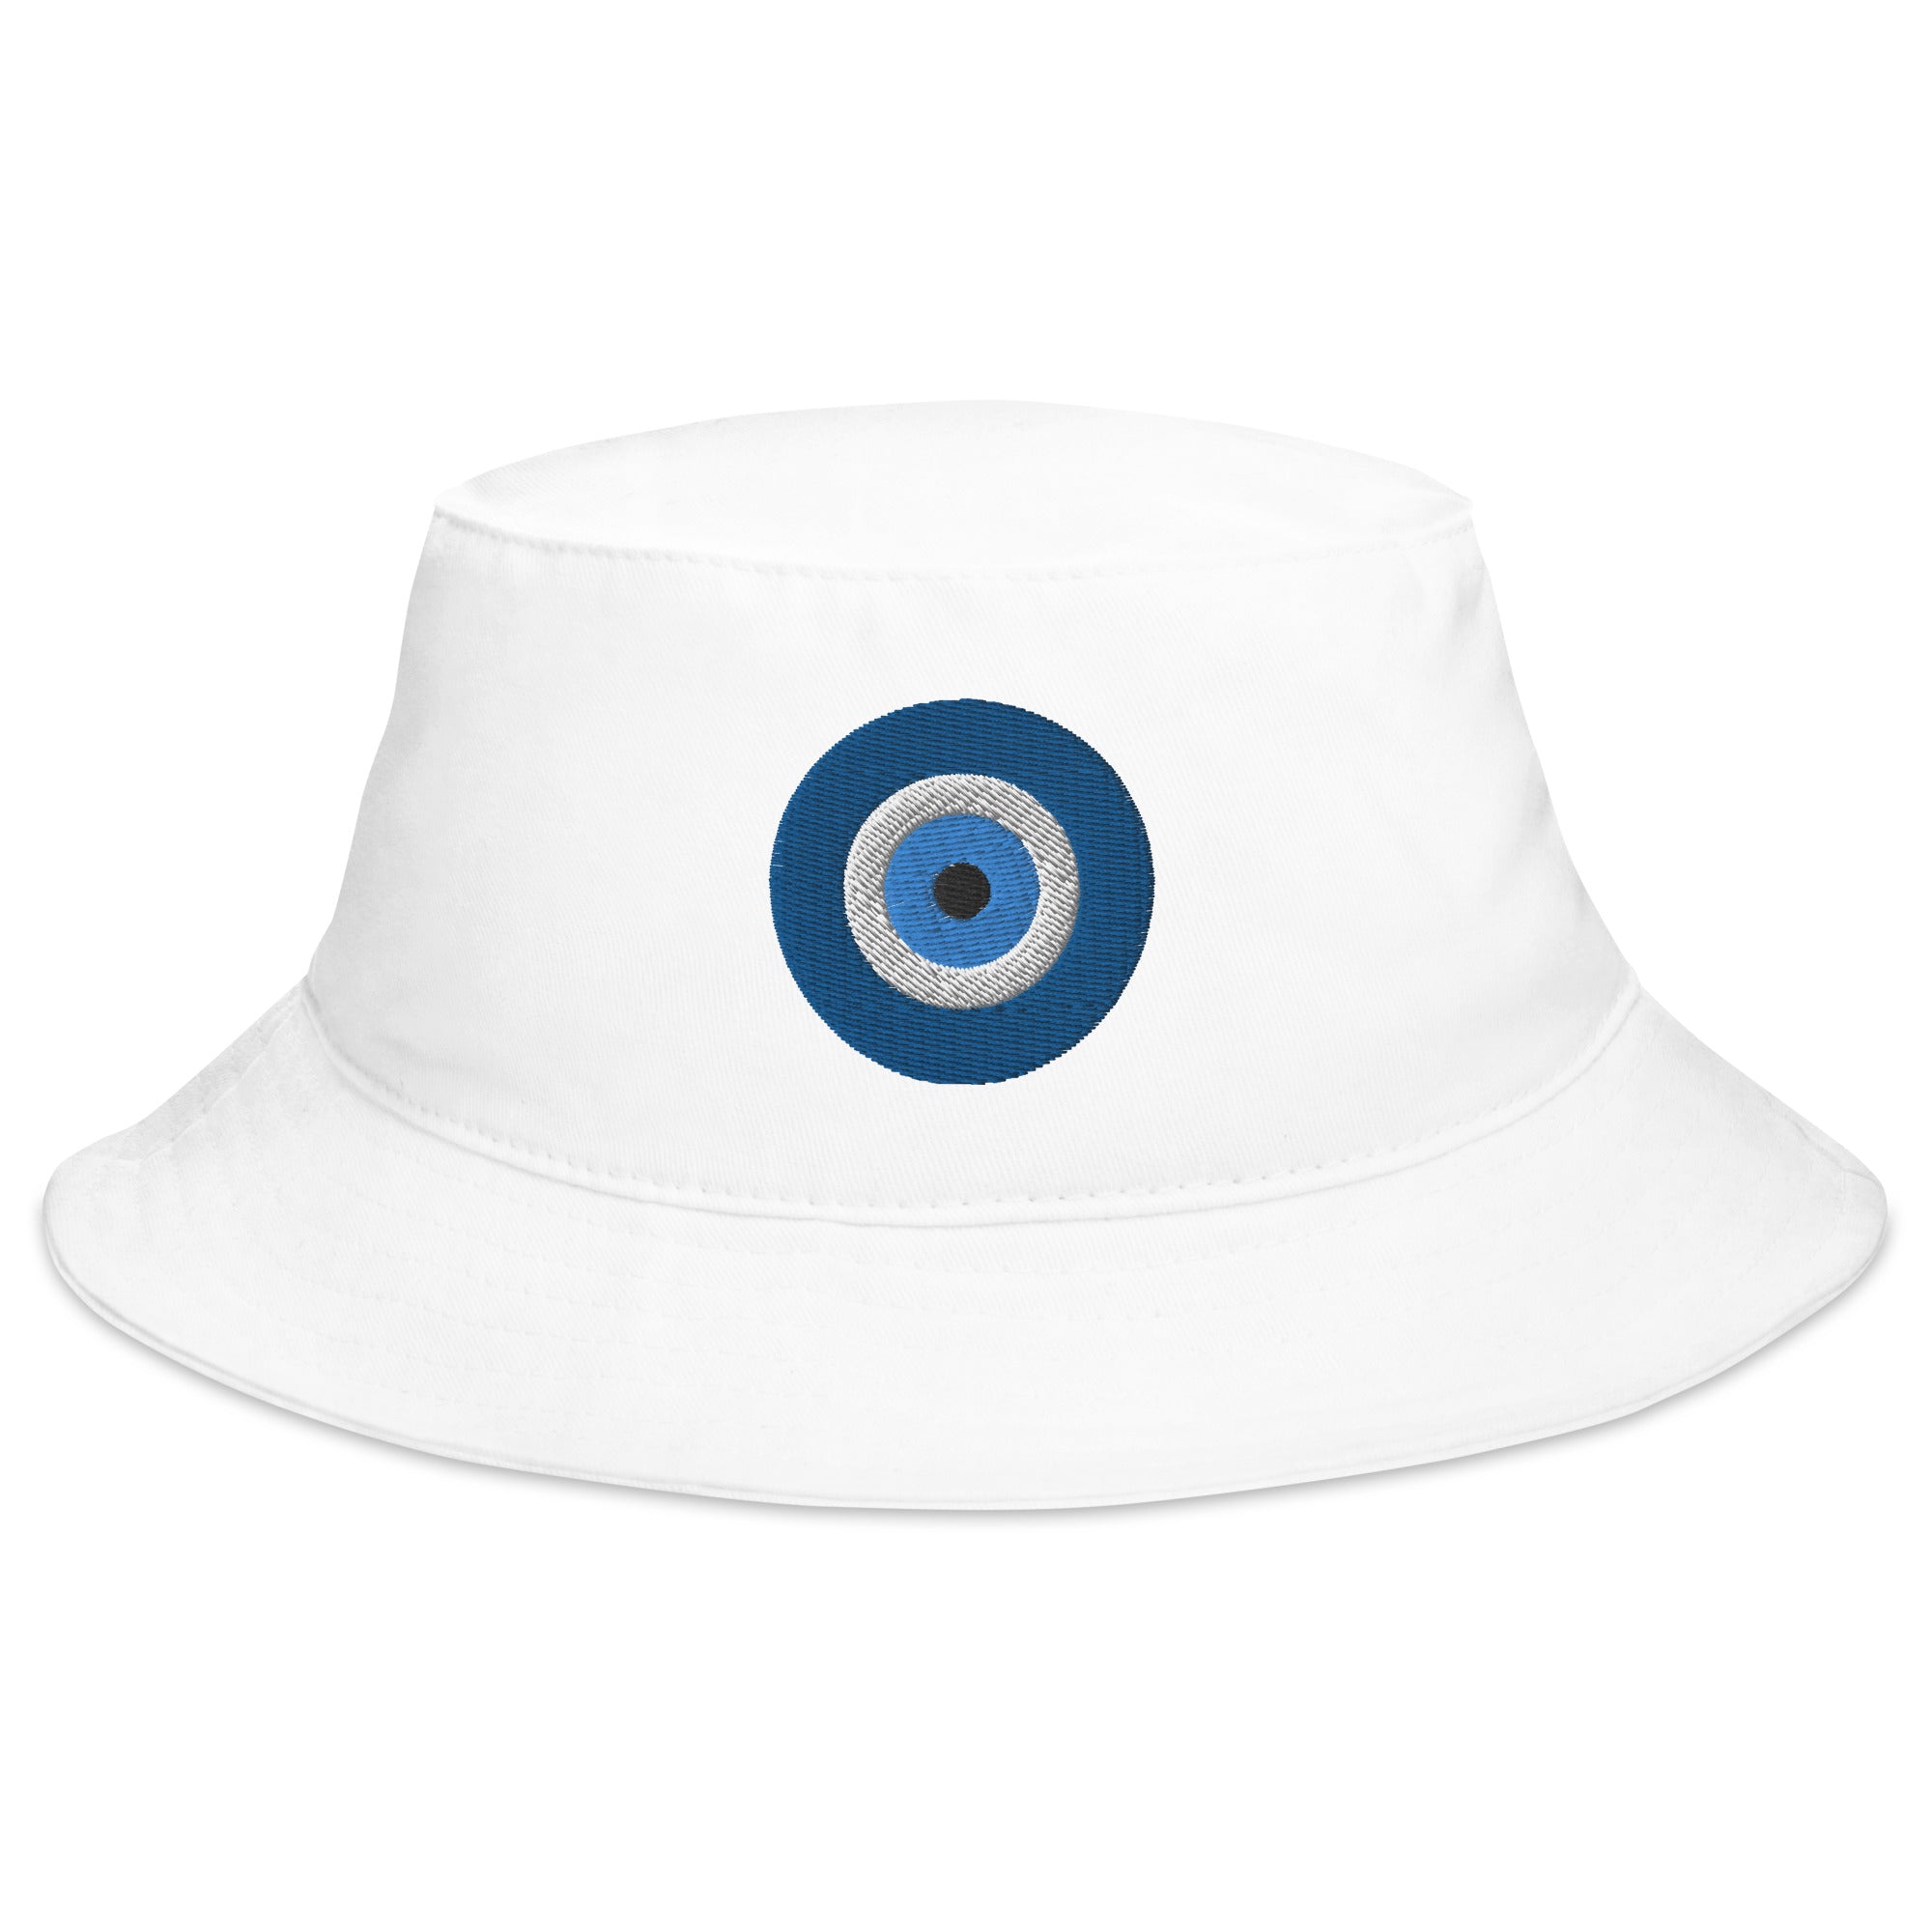 The Evil Eye Embroidered Bucket Hat Supernatural Look or Stare